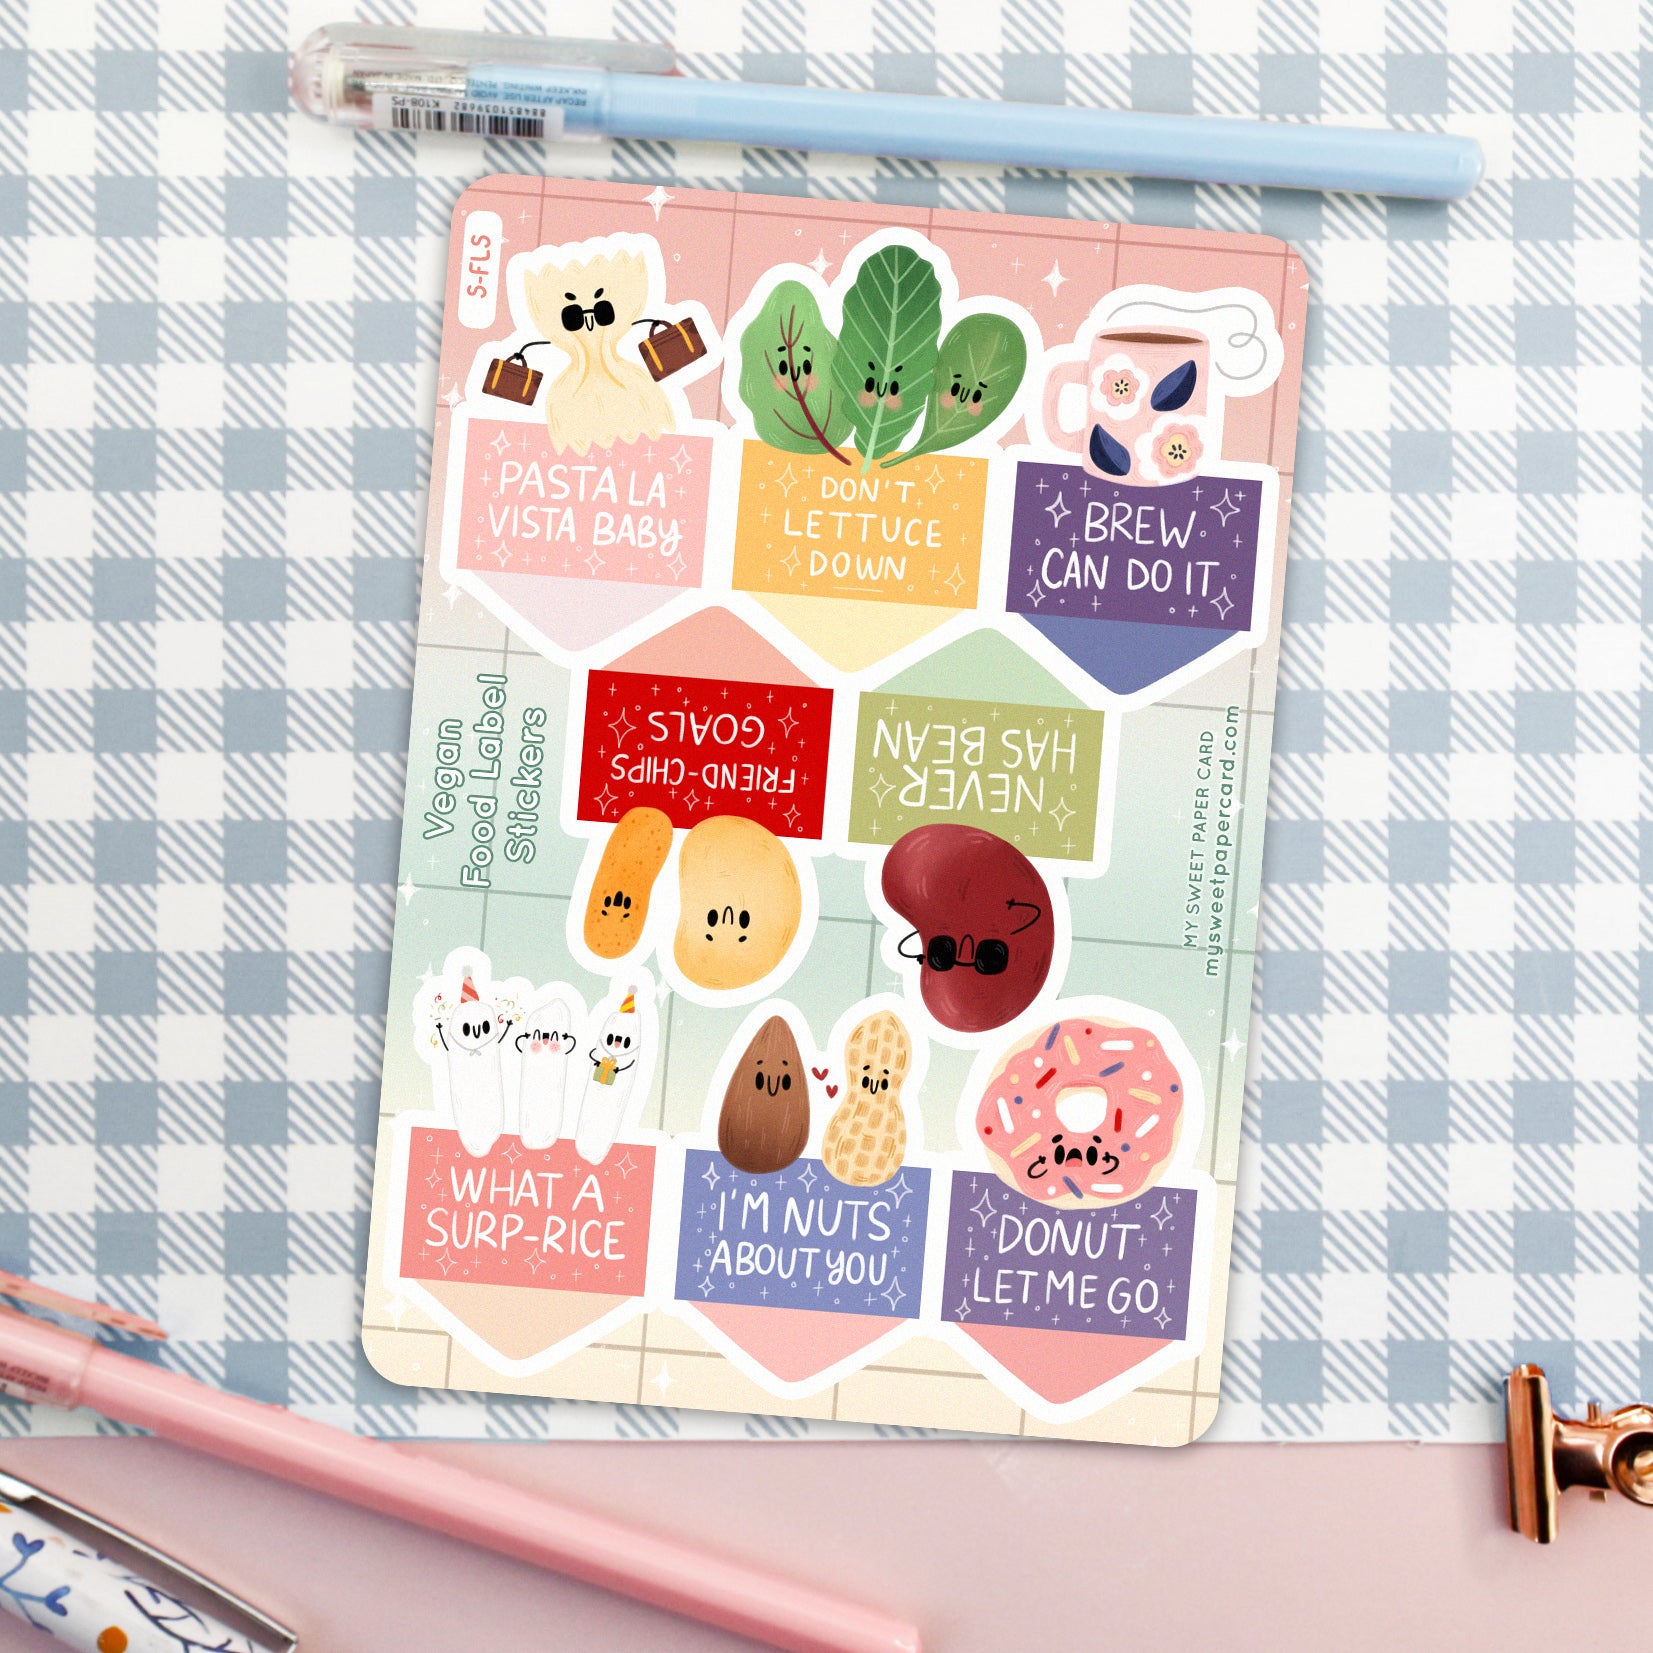 A6 Vegan Japanese Stickers - Planner stickers - Bullet Journal